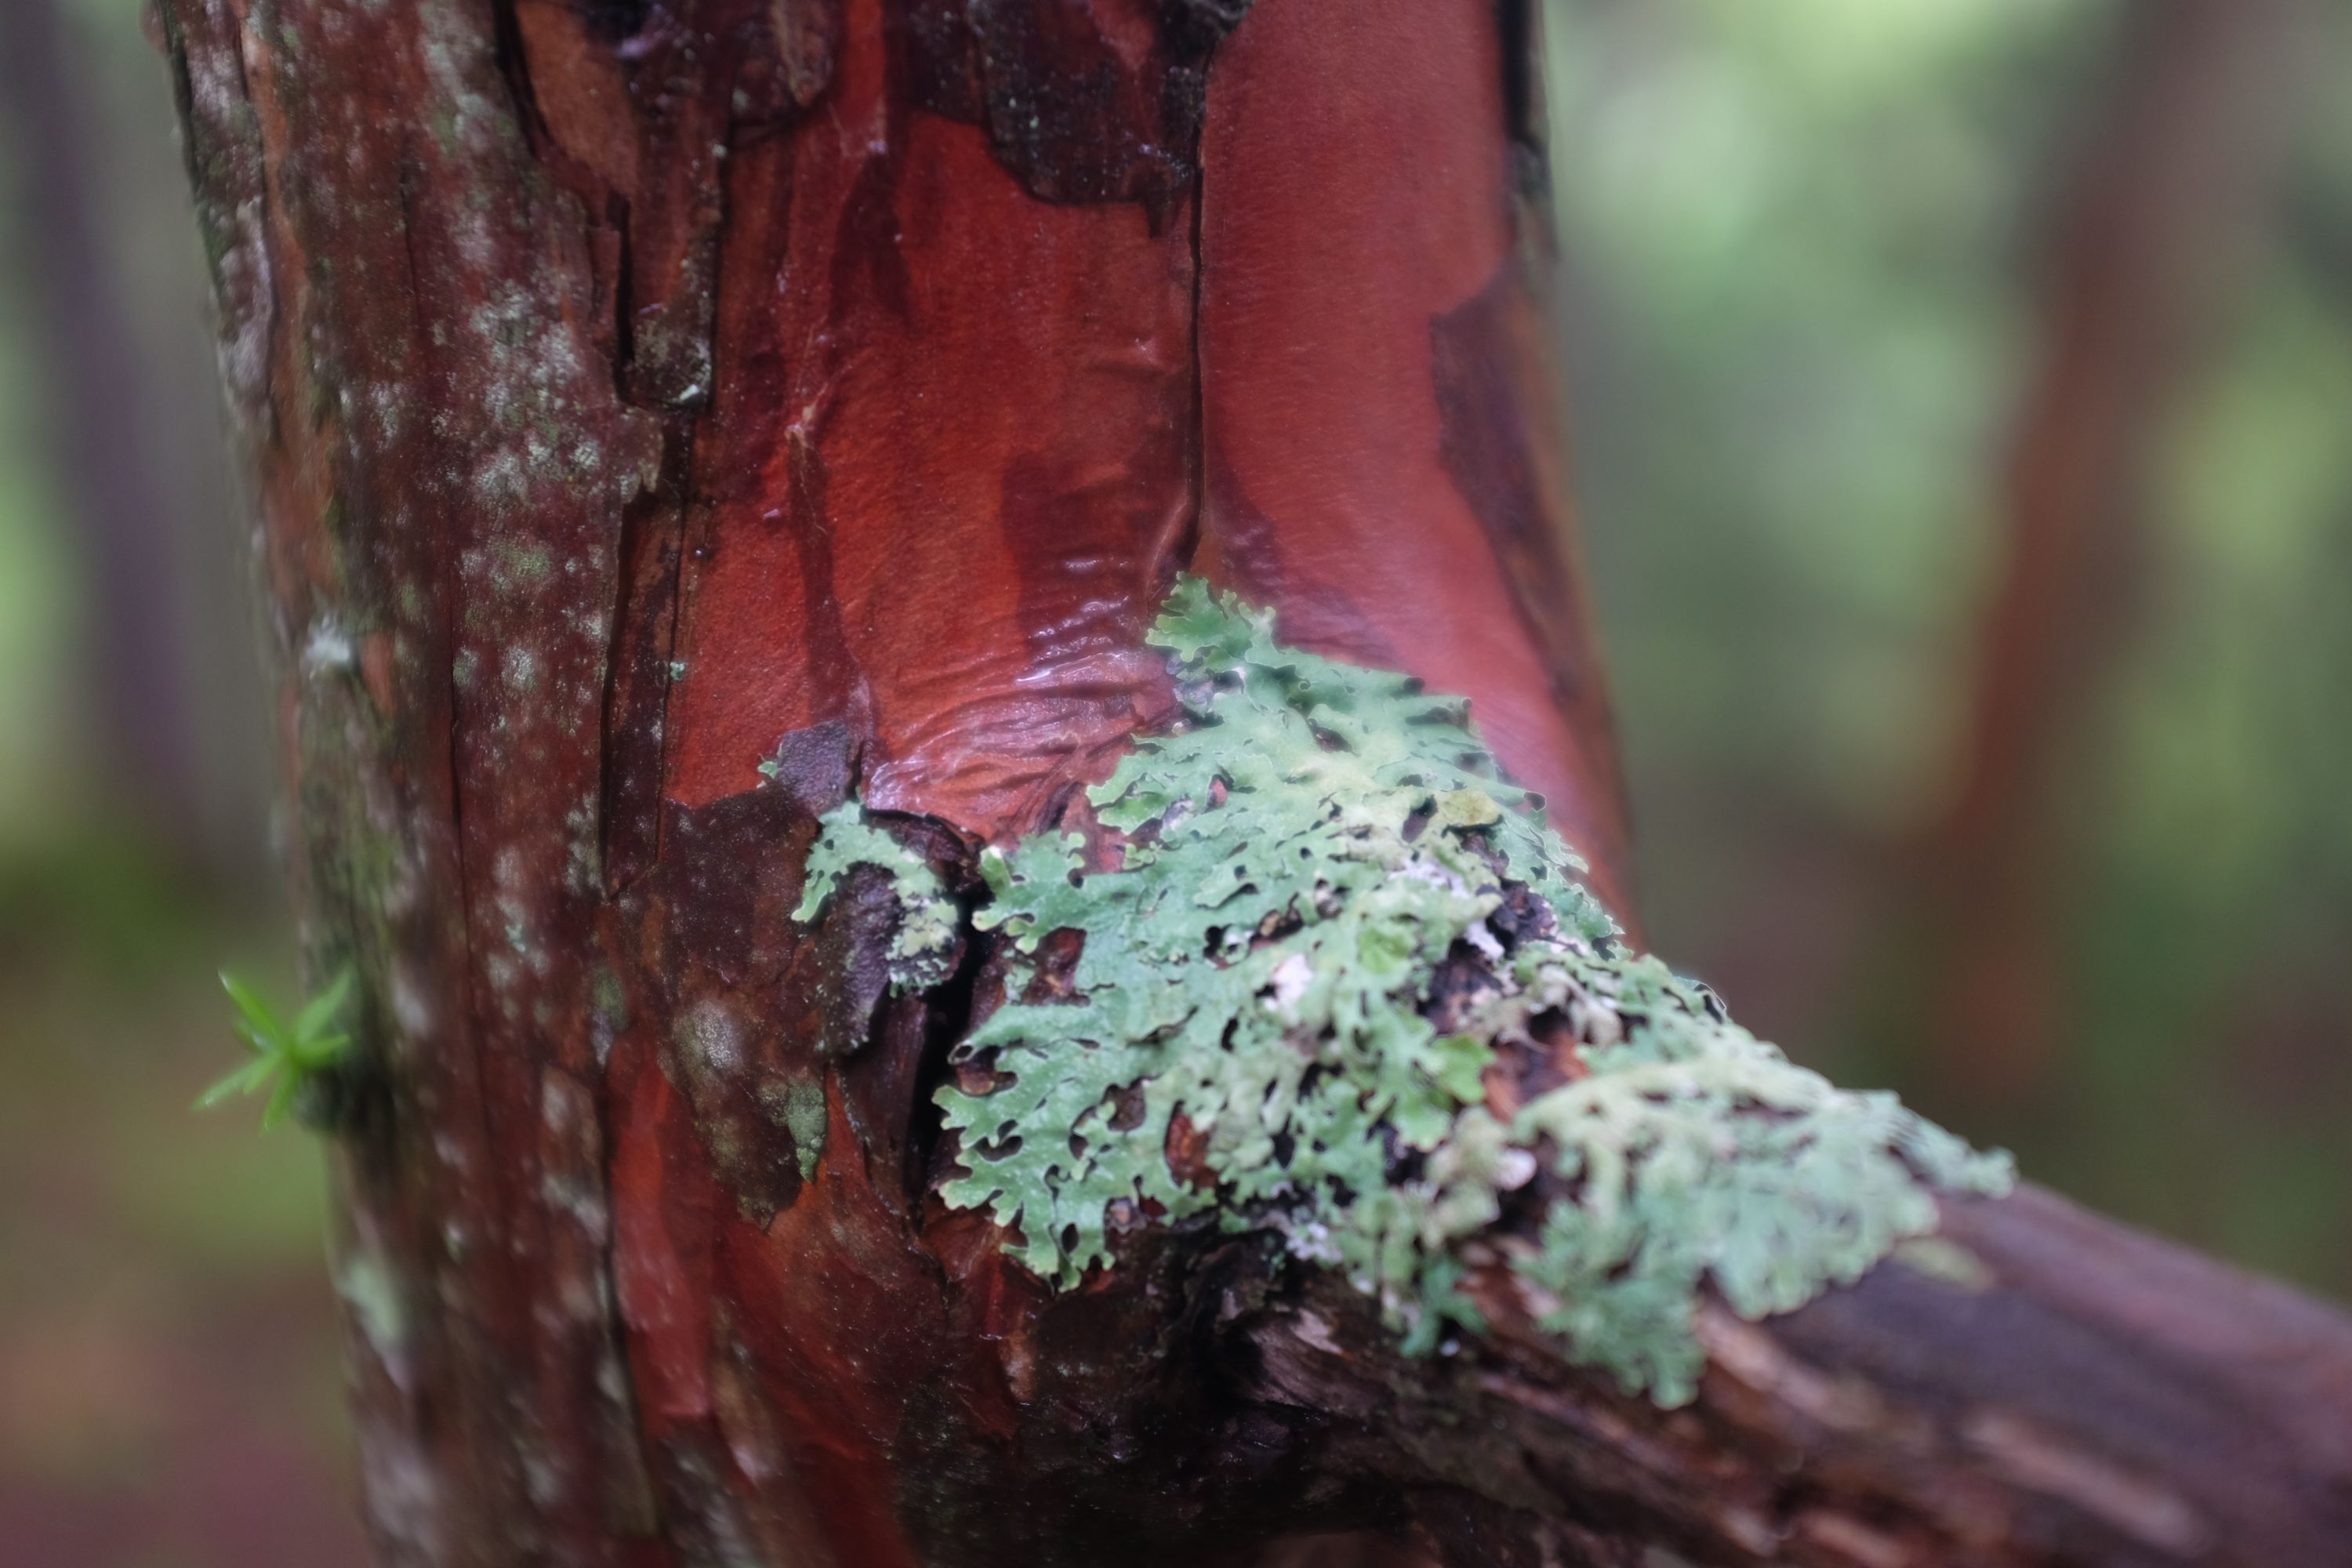 Lichen on the trunk of a tree with deep red bark.